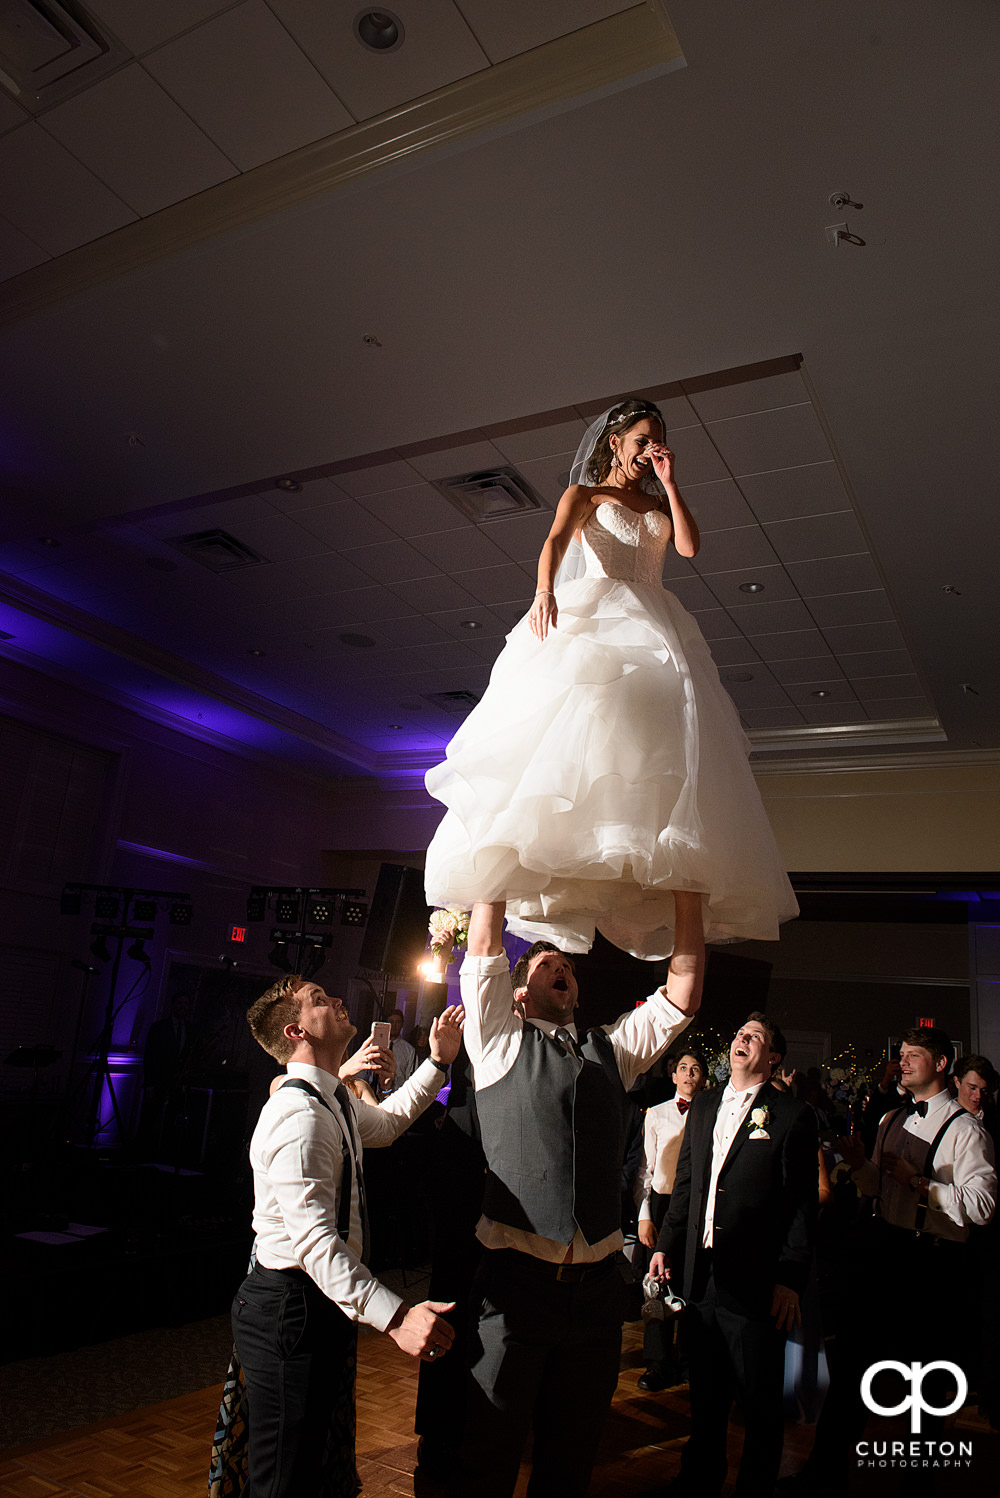 Bride performing a cheer stunt at her wedding.